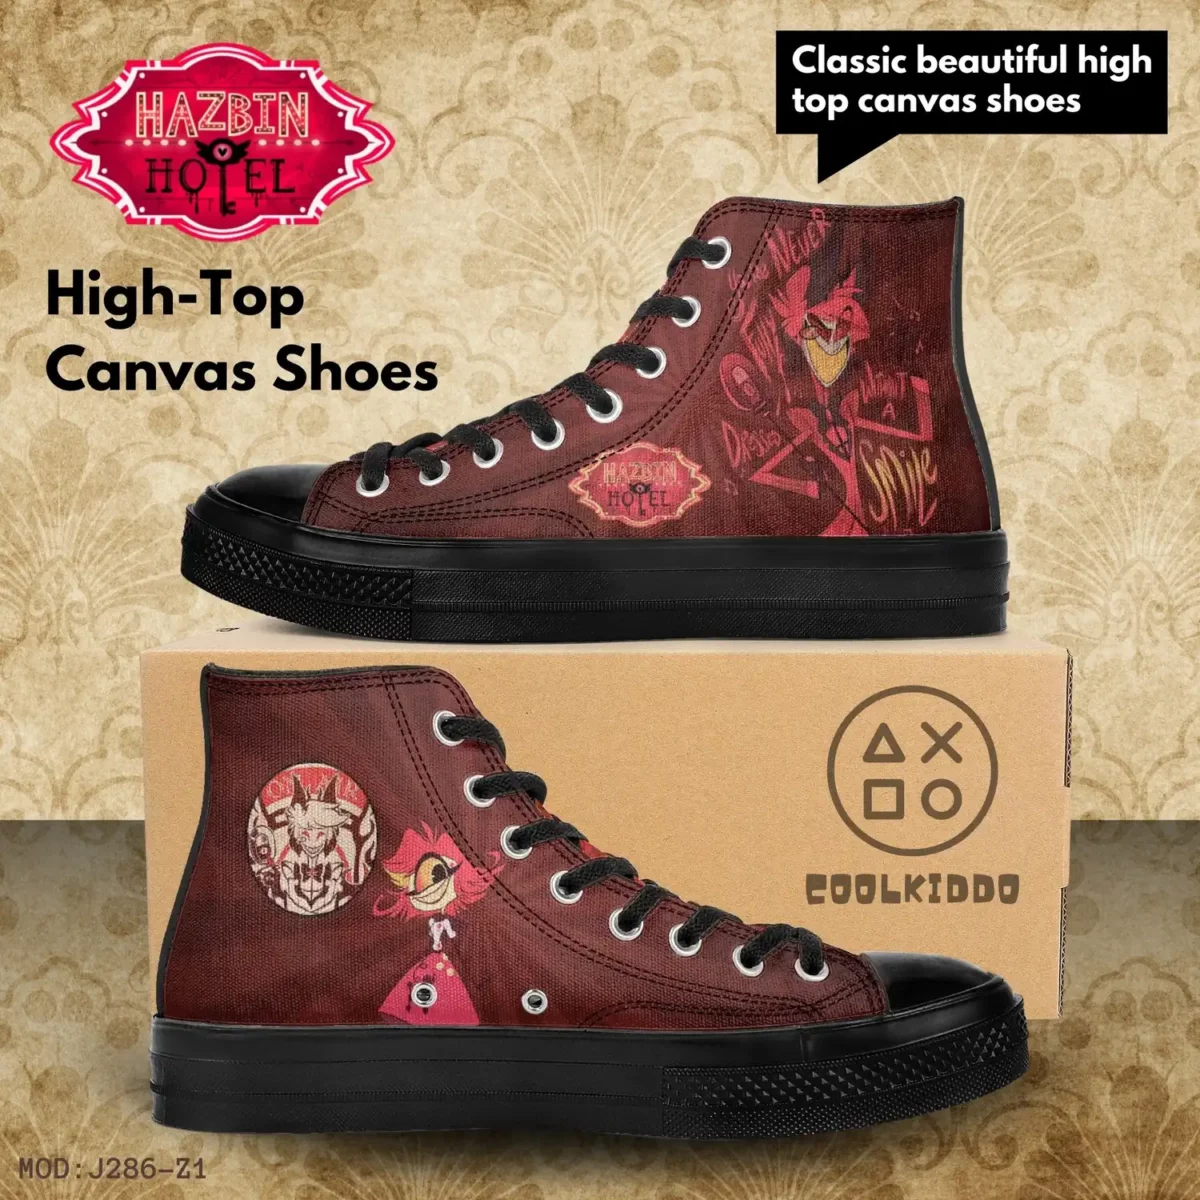 Custom Hazbin Hotel High-Top Canvas Sneakers, Animated Series Inspired Casual Shoes for any season Cool Kiddo 10